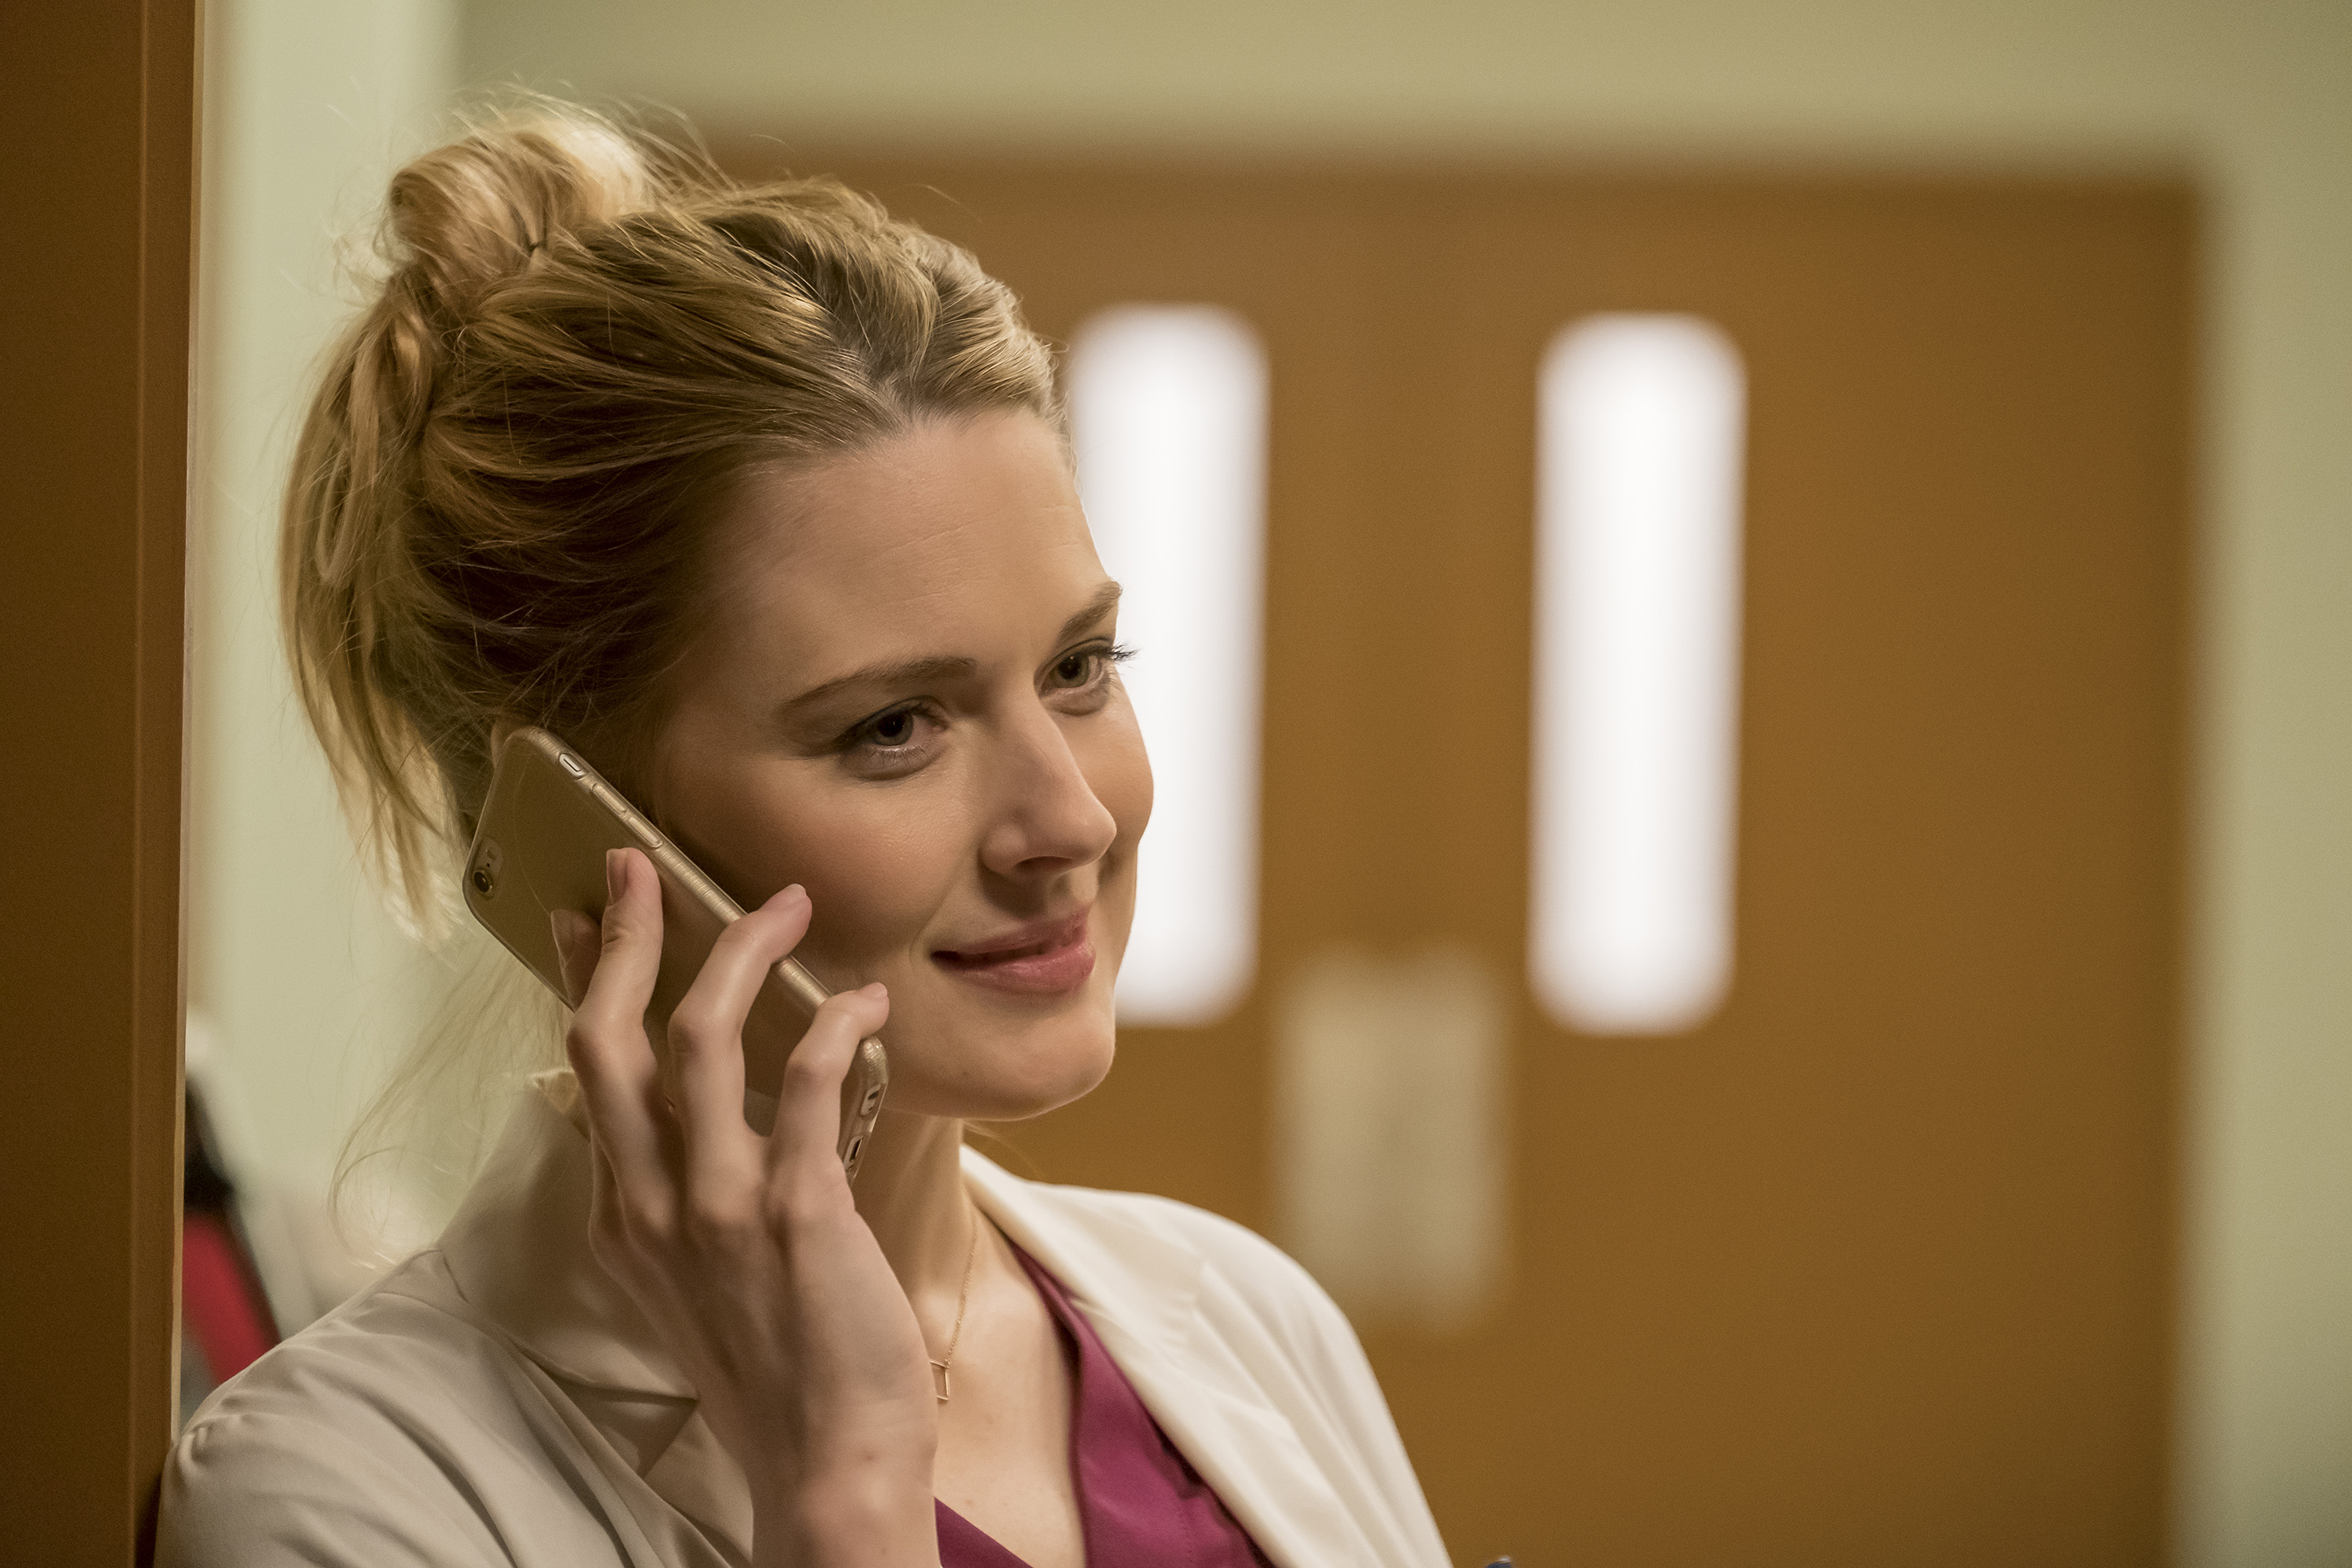 Alexandra Breckenridge, in character as Sophie in 'This Is Us' Season 1, wears a white doctor's coat over dark red scrubs and holds her cell phone to her ear.